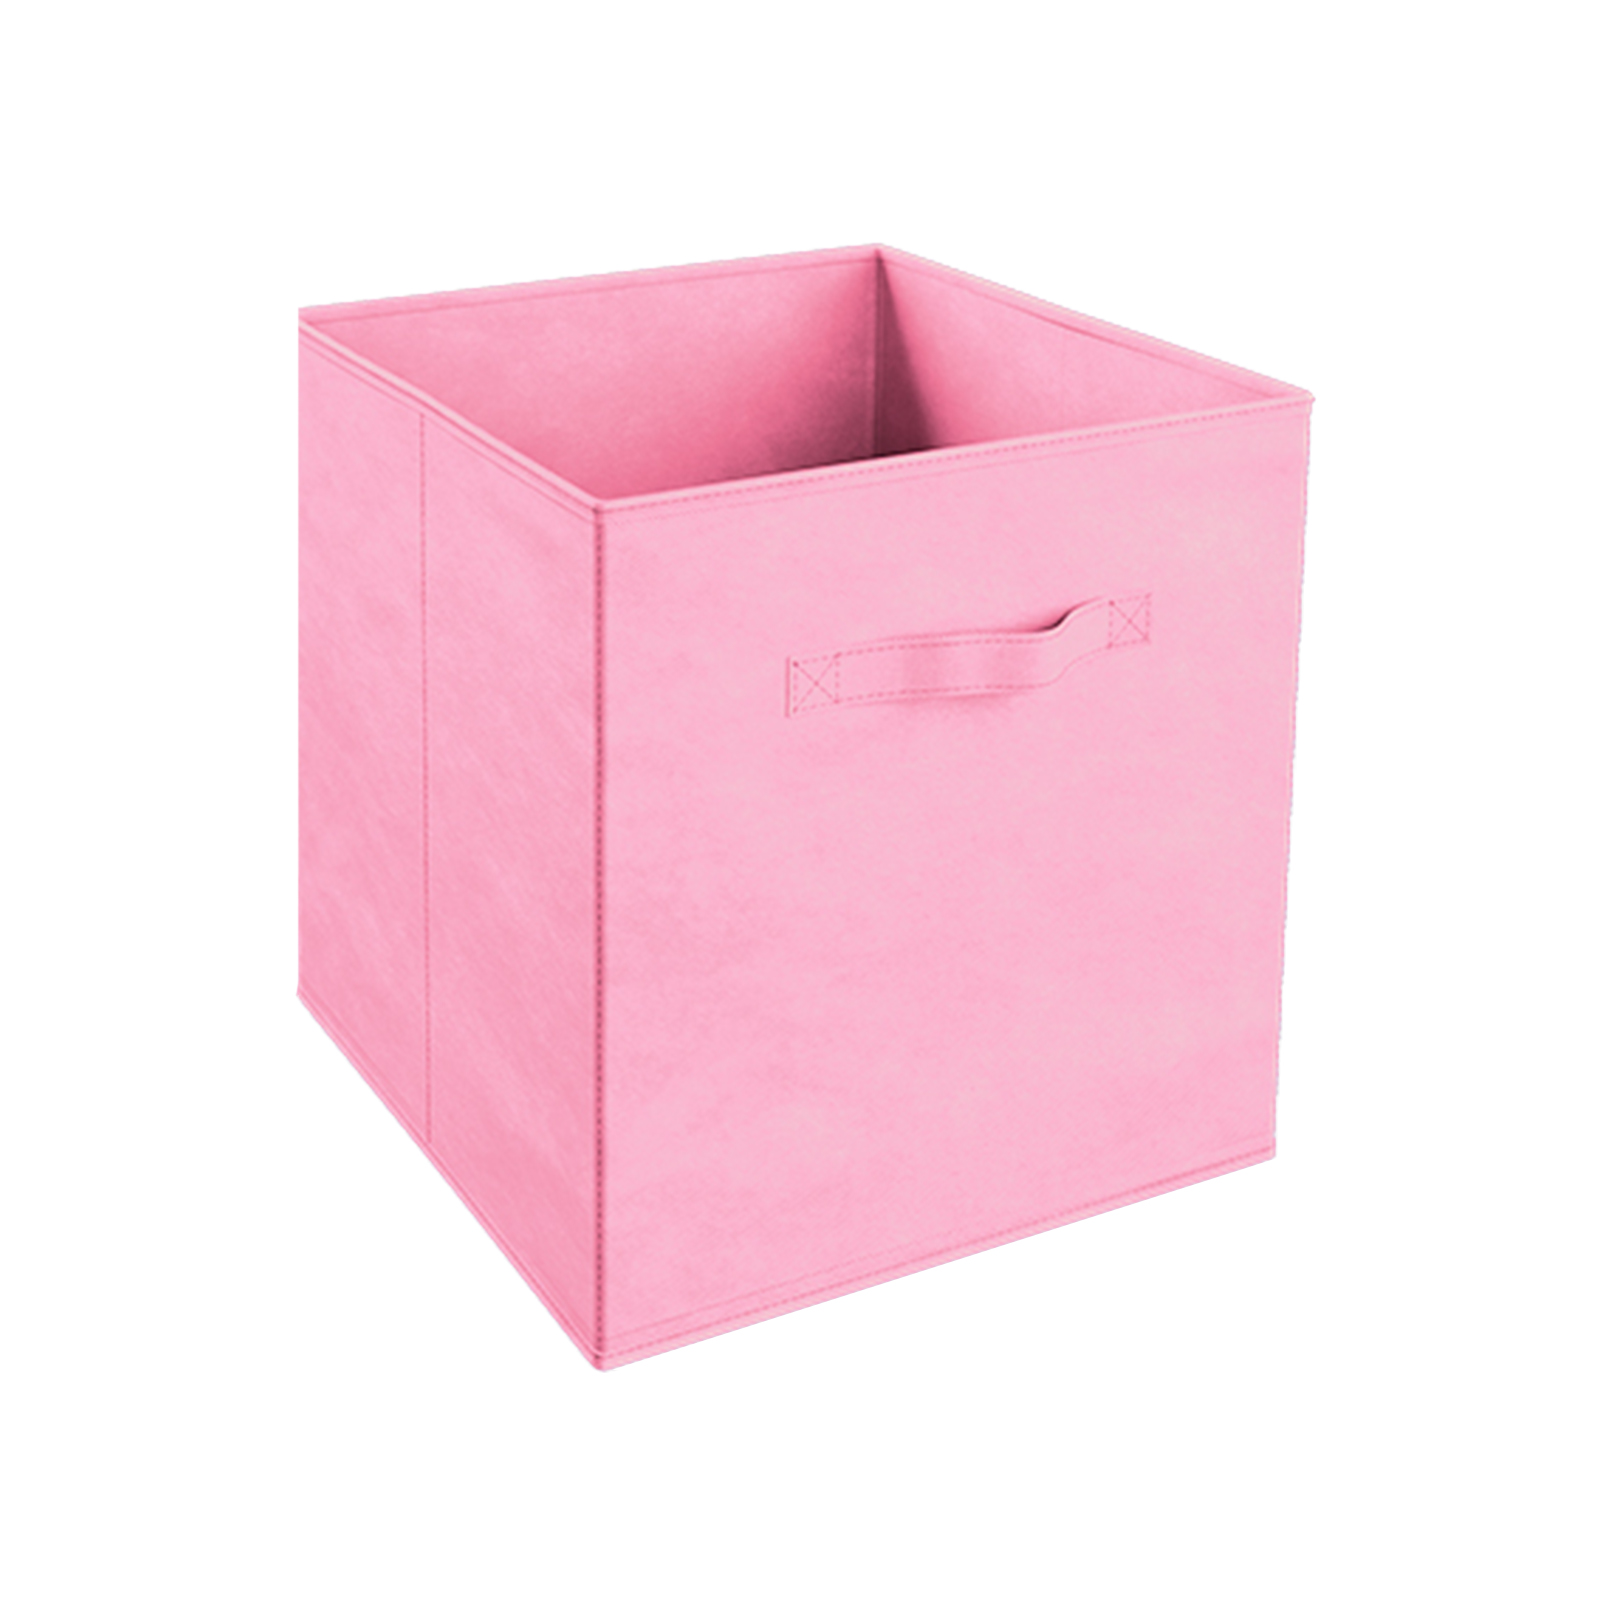 Clever Cube Compact Fabric Insert Pale Pink